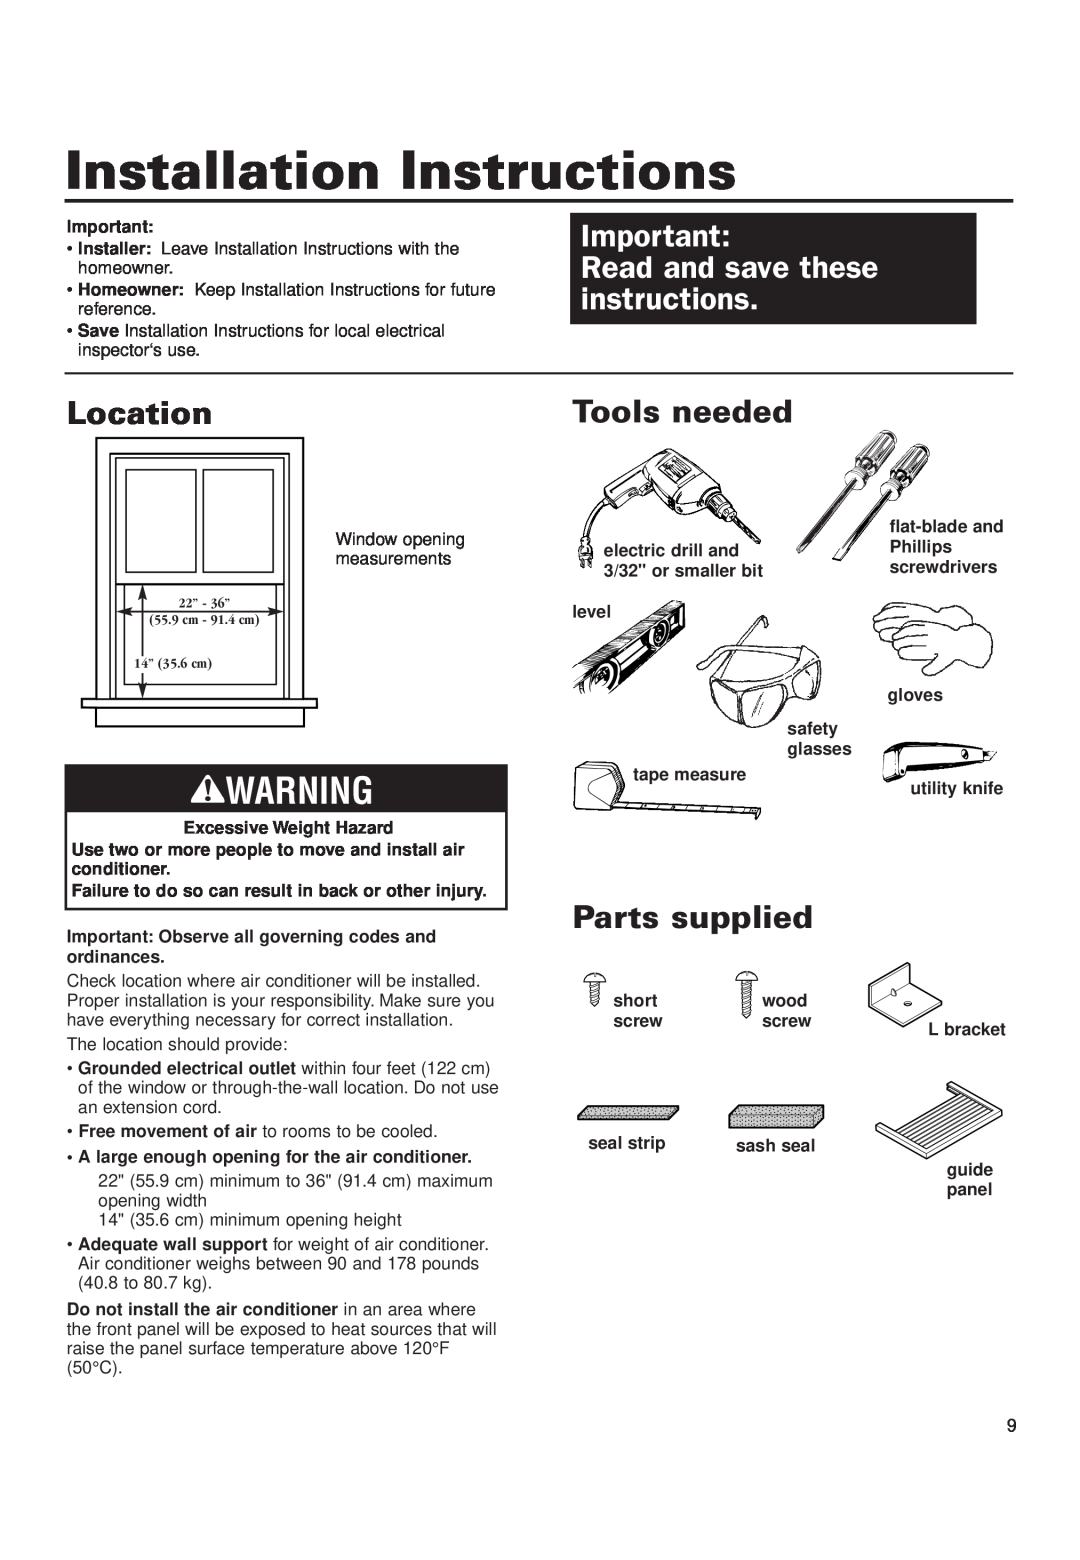 Whirlpool RA51K0 Installation Instructions, Read and save these instructions, Location, Tools needed, Parts supplied 